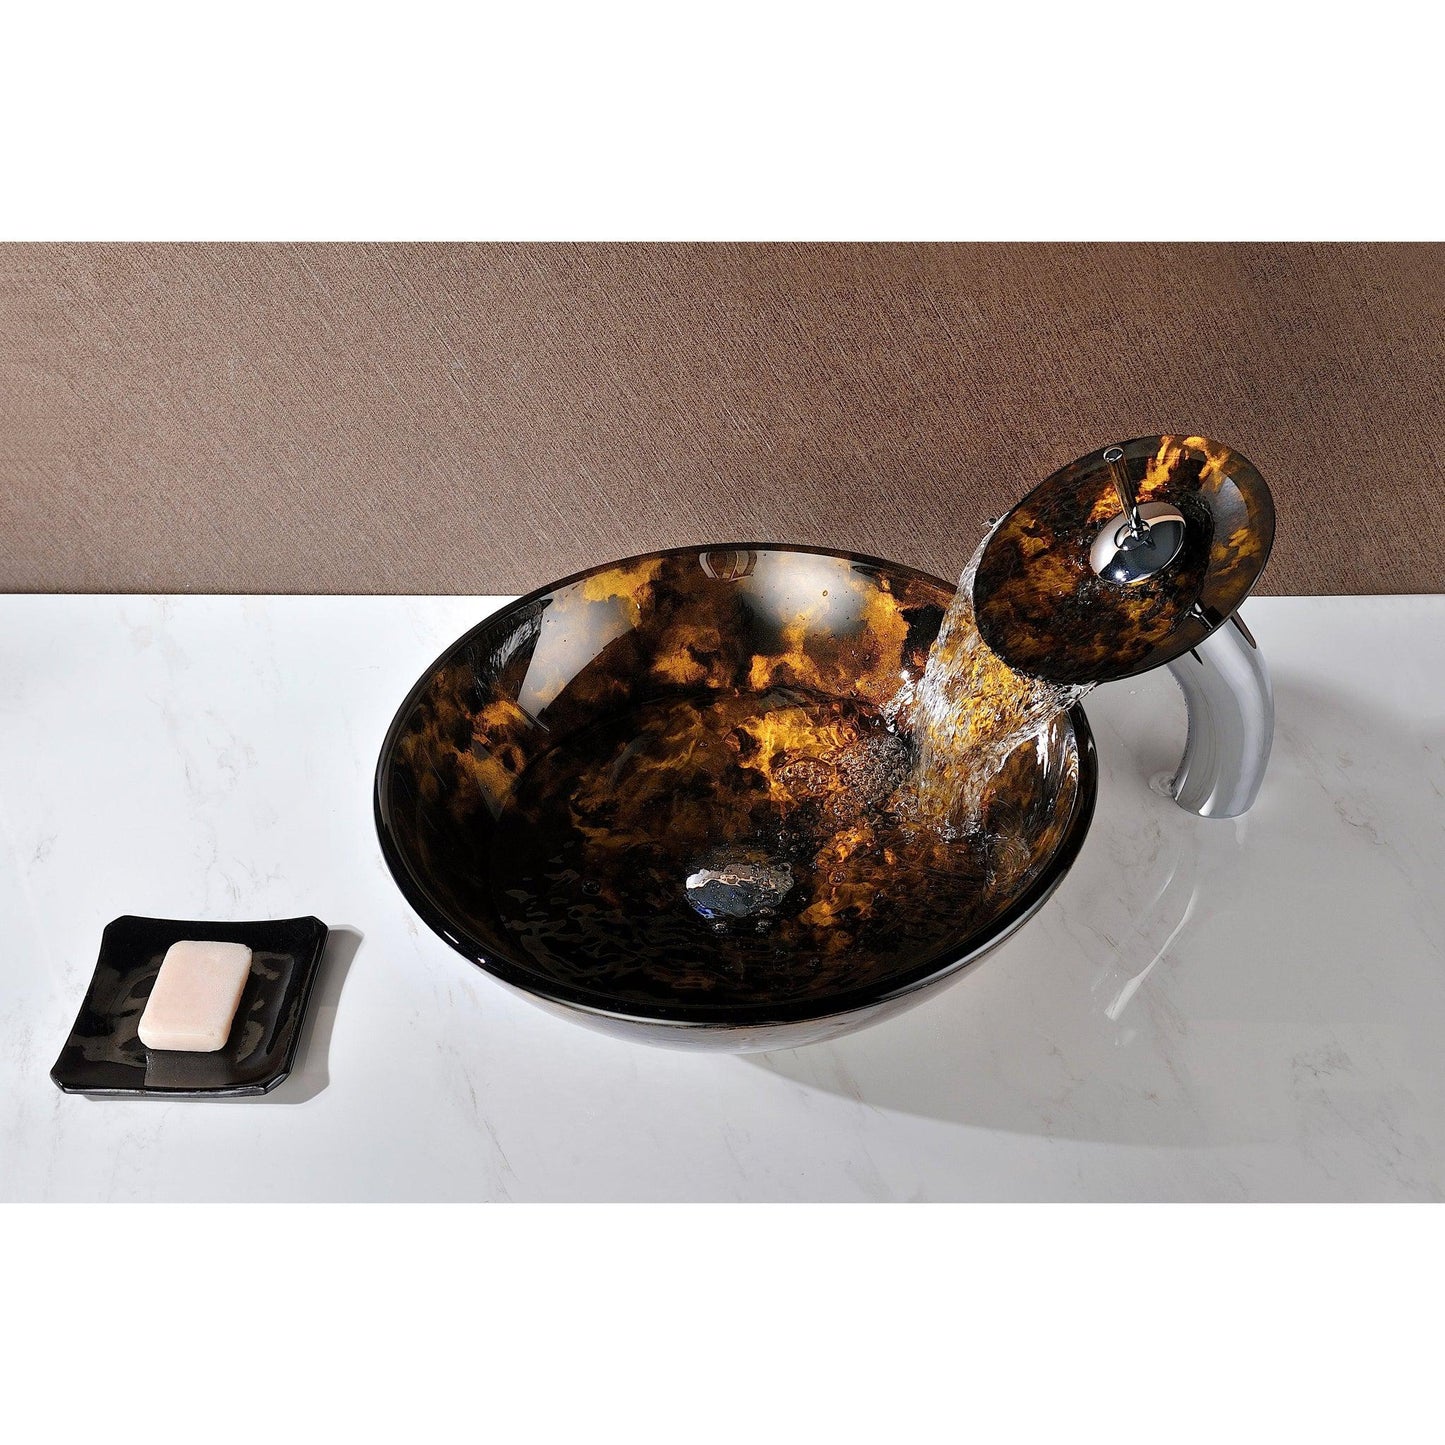 ANZZI Timbre Series 17" x 17" Round Kindled Amber Deco-Glass Vessel Sink With Polished Chrome Pop-Up Drain and Waterfall Faucet